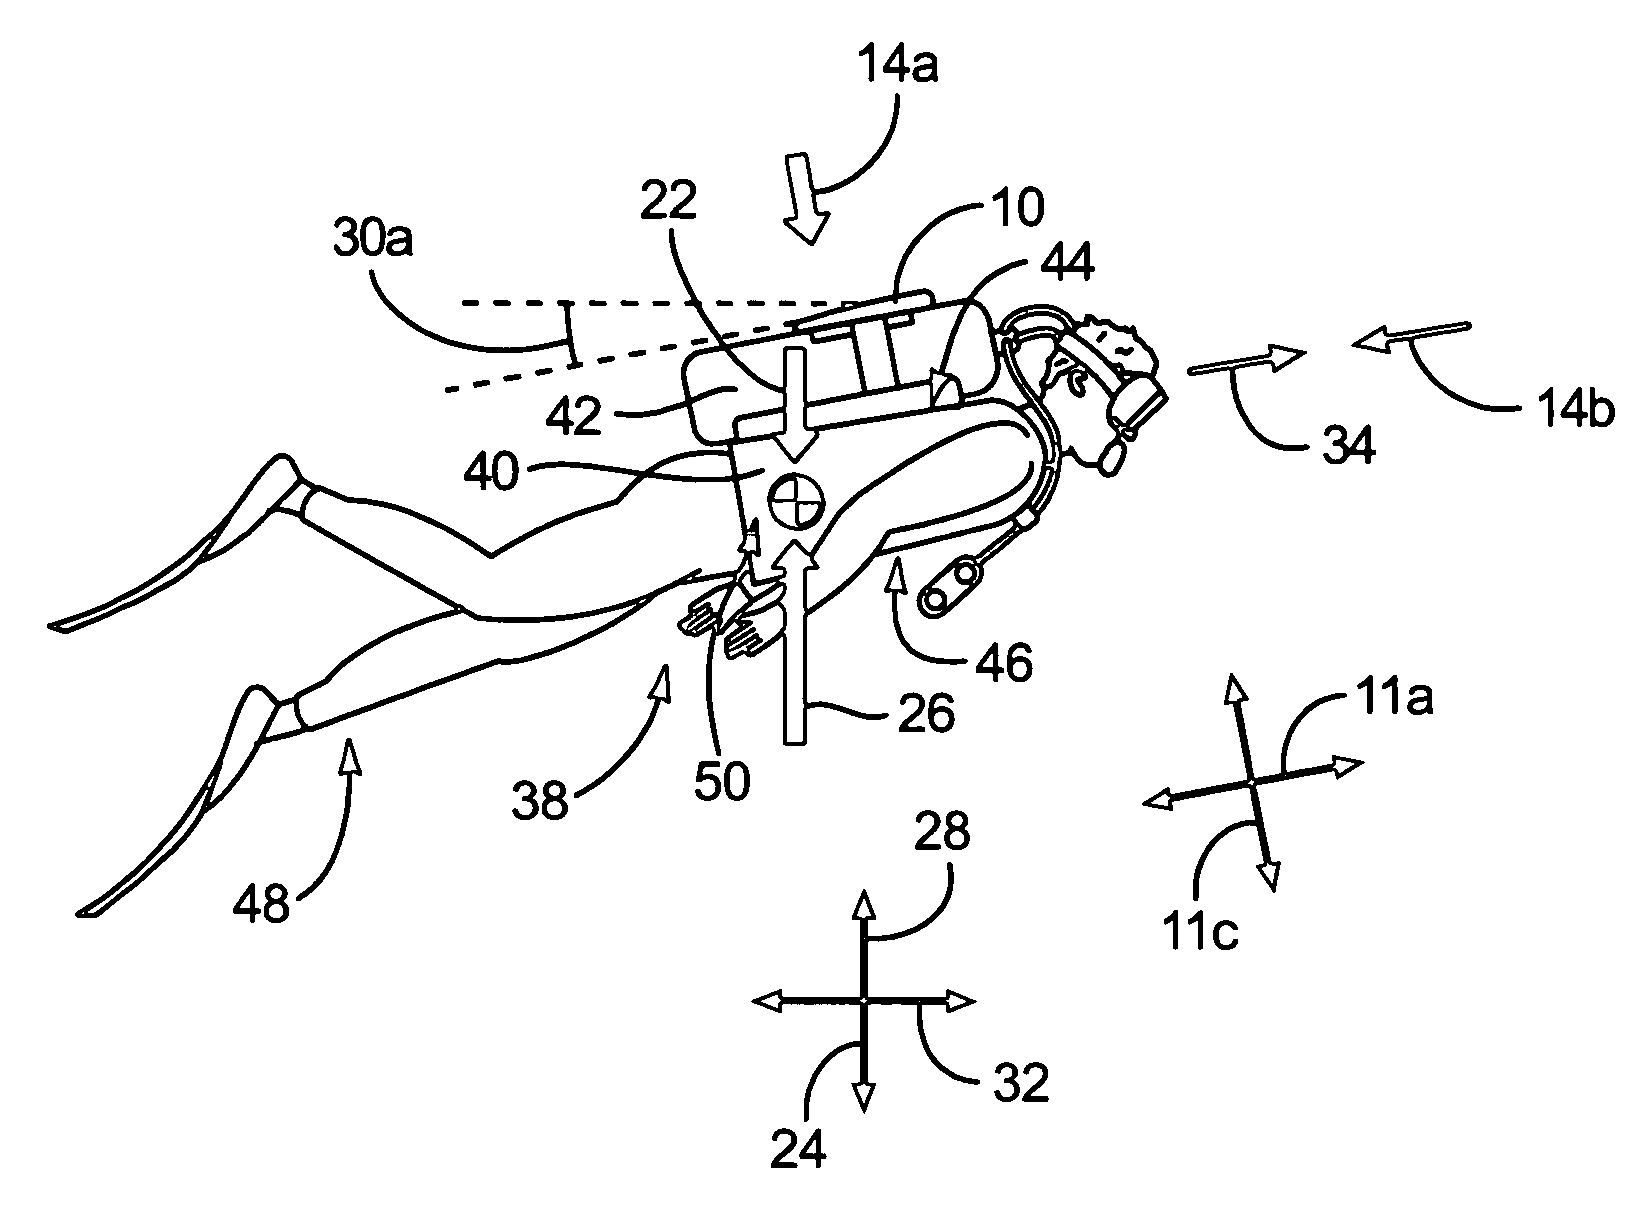 Buoyancy-based, underwater propulsion system and method